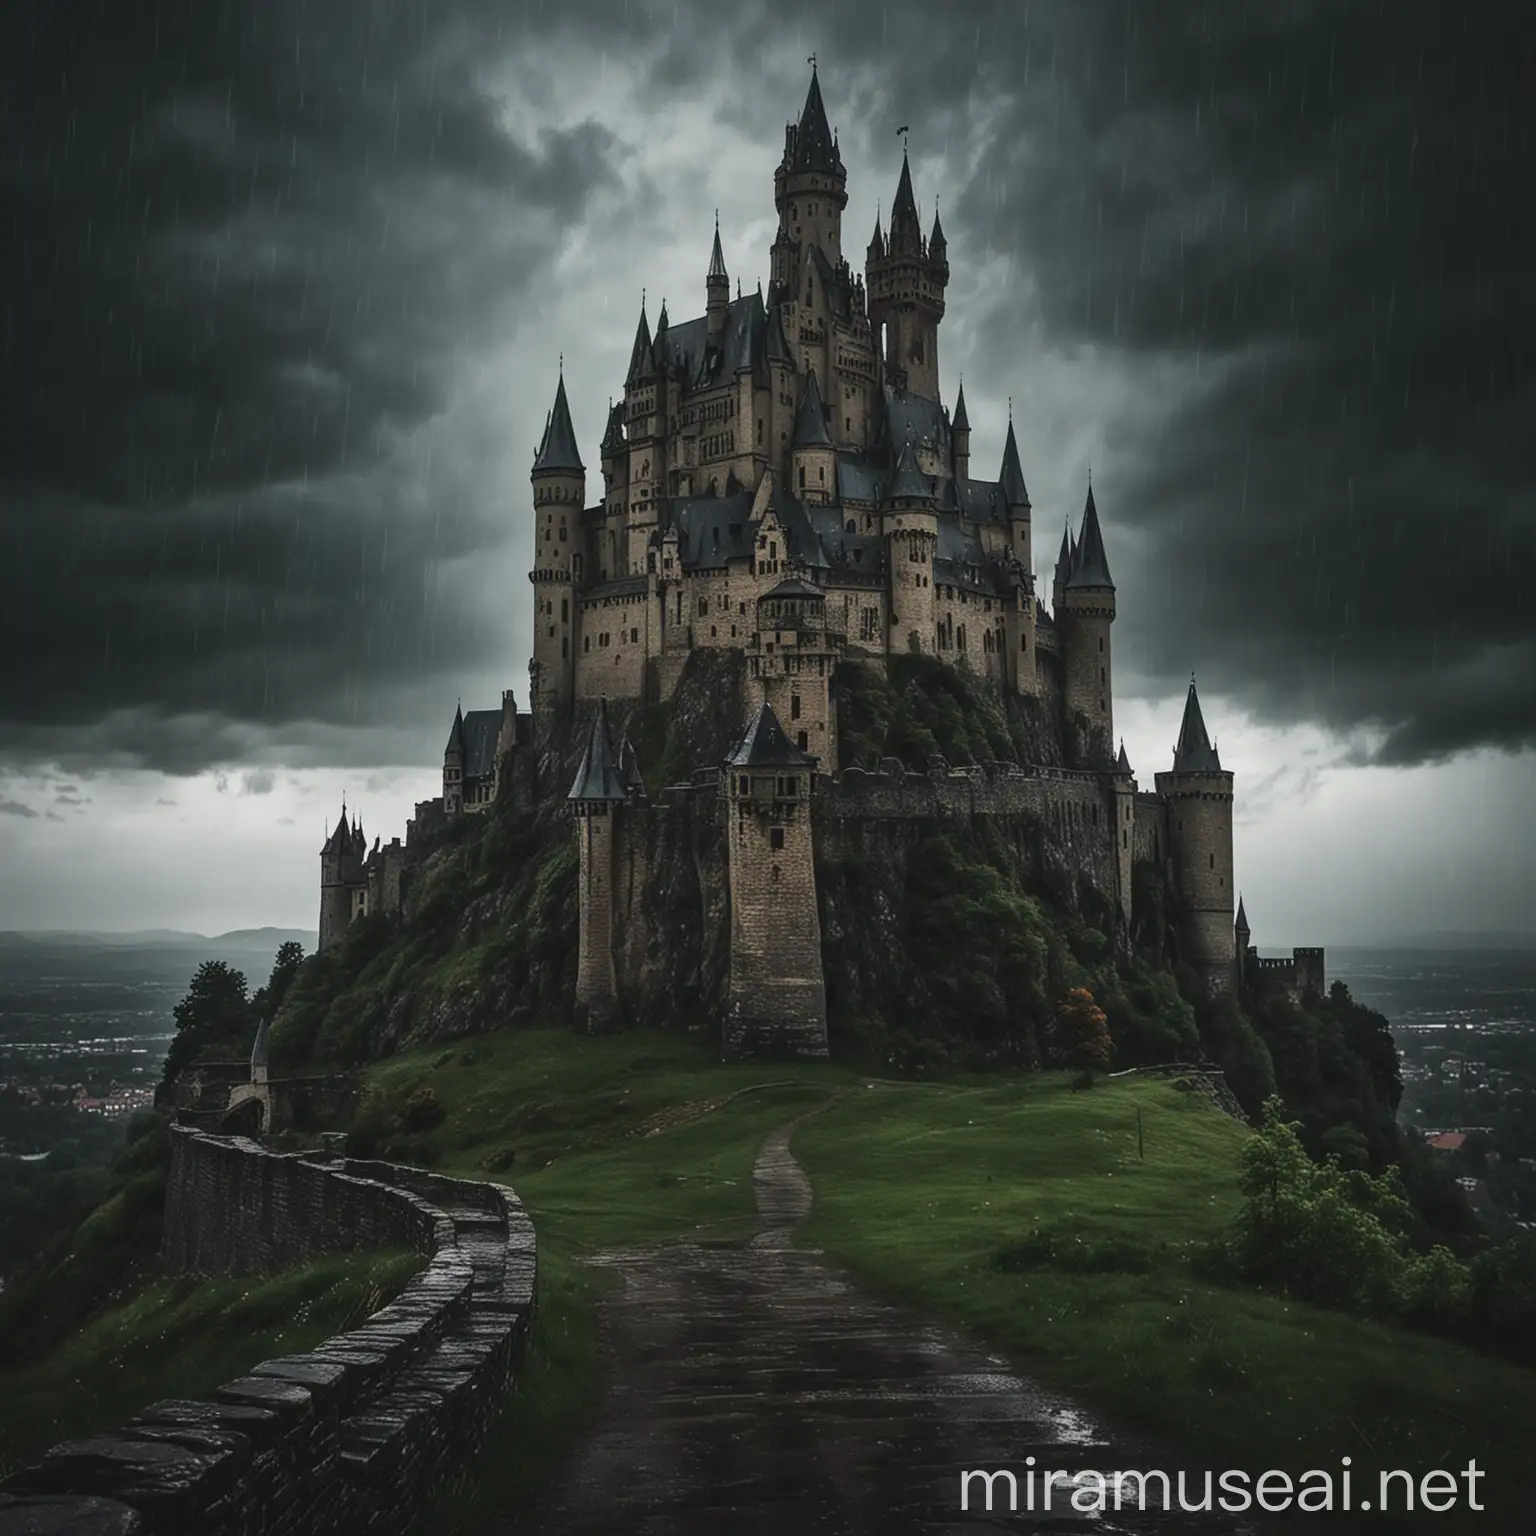 Majestic Castle in a Stormy Night